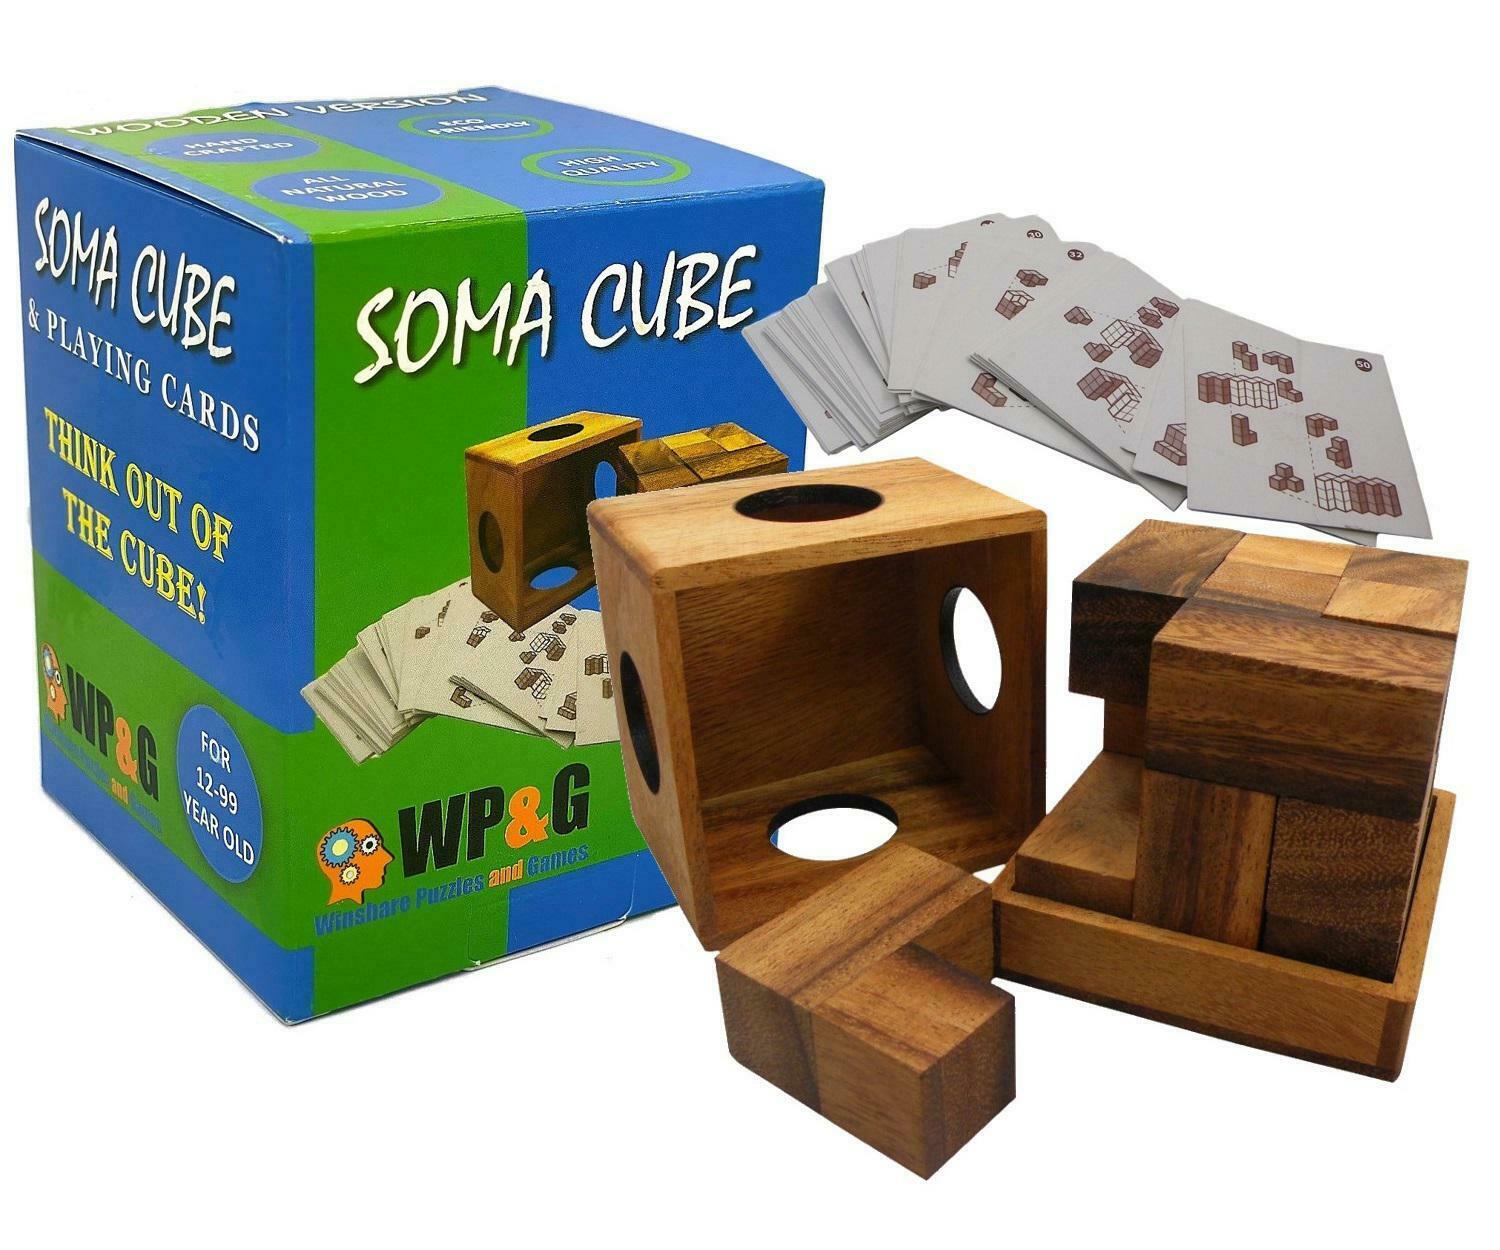 Soma Cube Set With 50 Playing Cards - Brain Teaser Wooden Puzzle